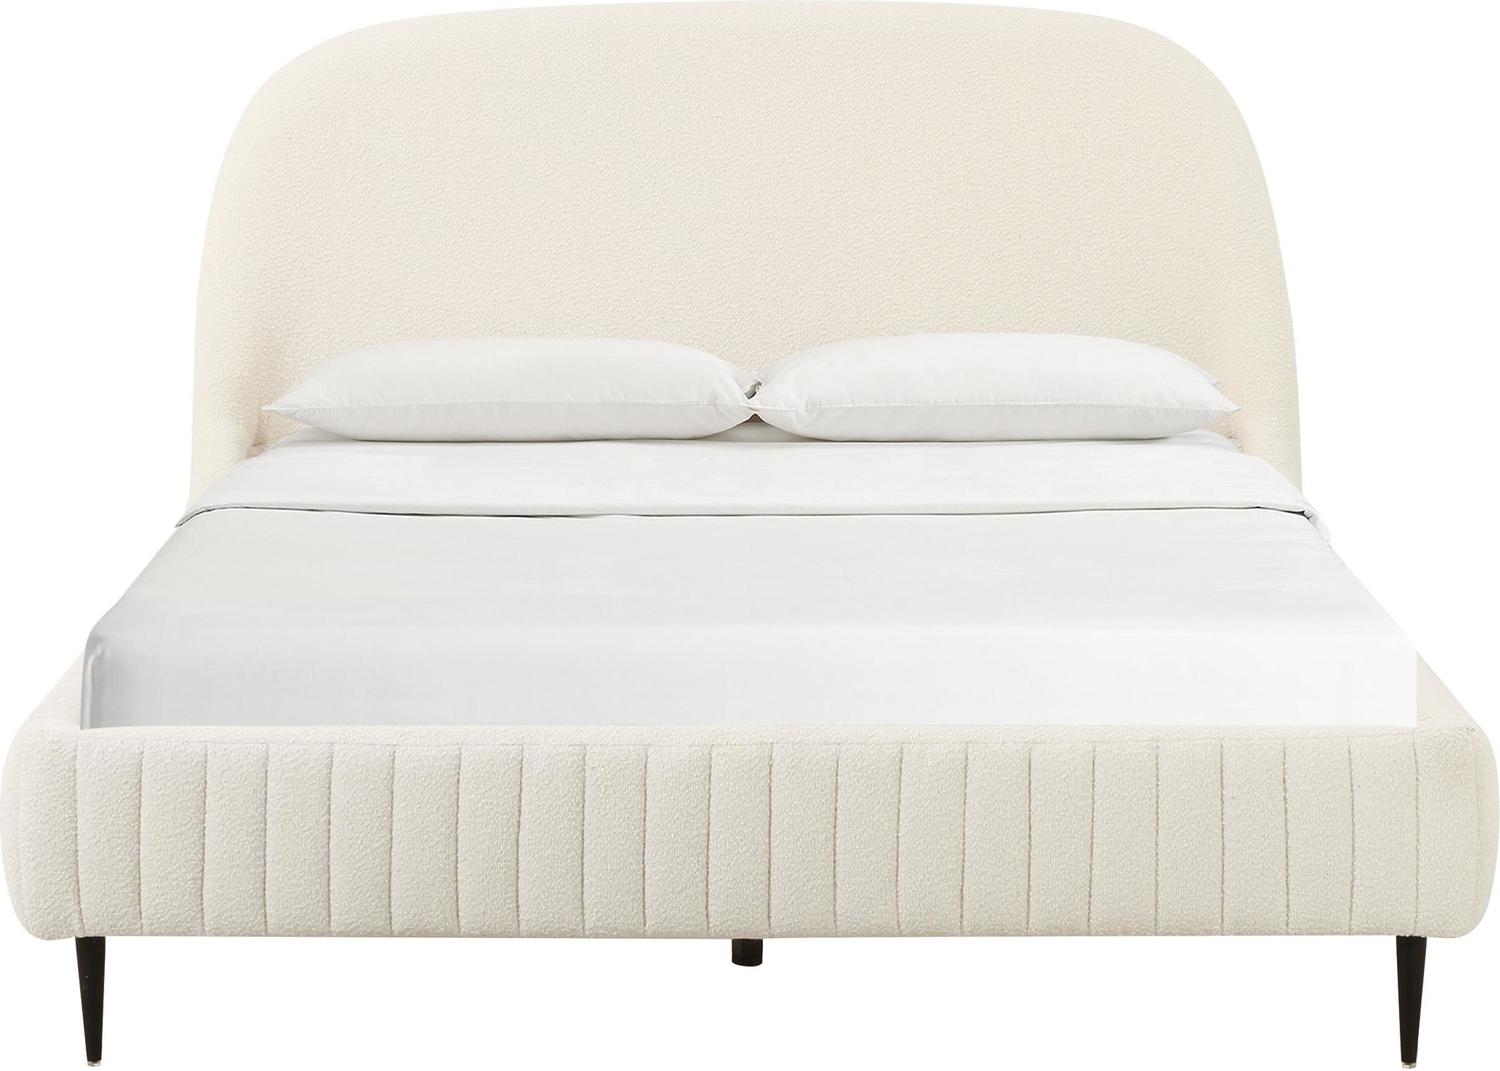 fabric twin bed Tov Furniture Beds Cream